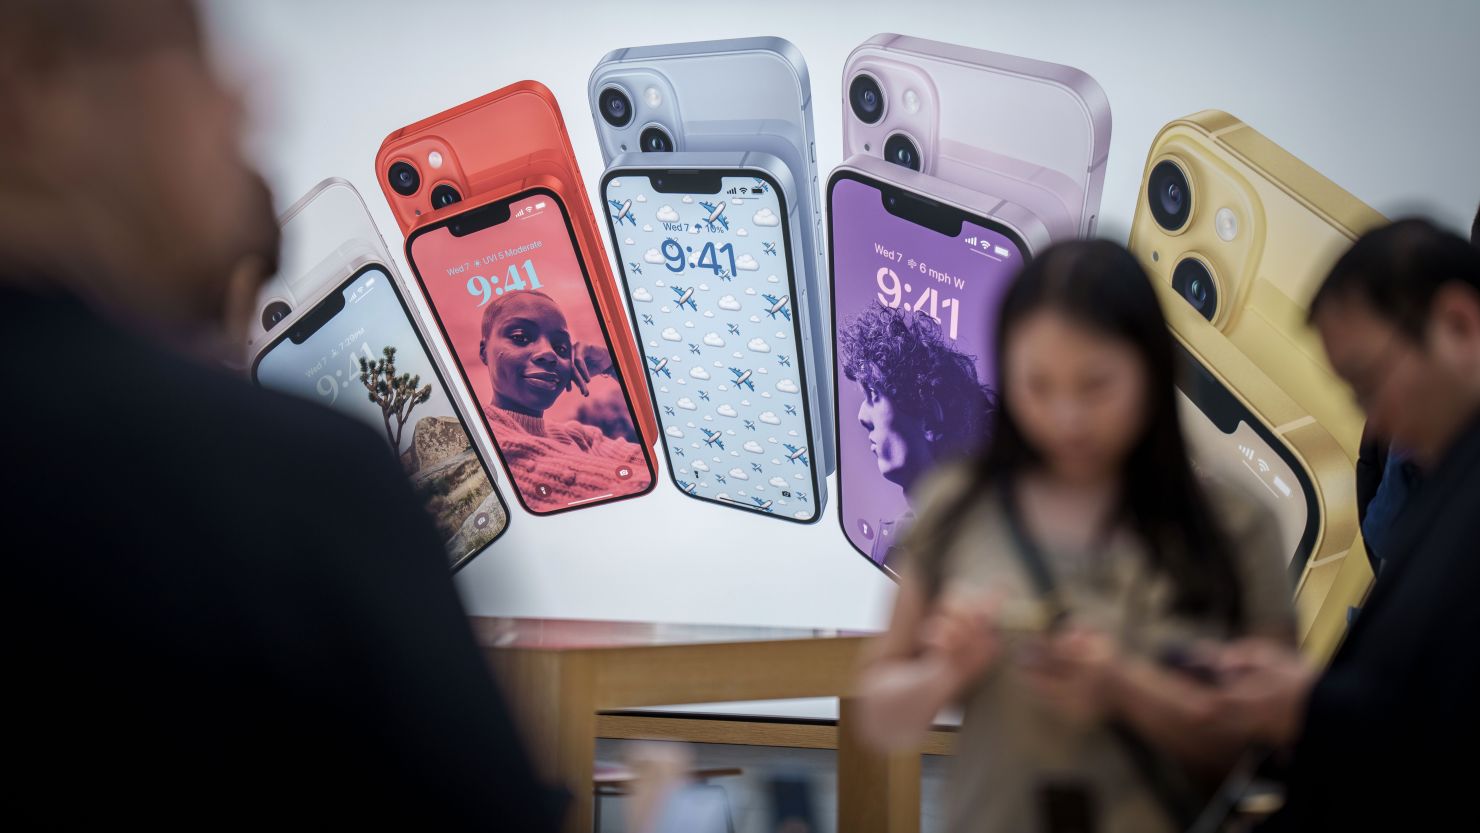 iPhones are on display at the Apple Store on 5th Avenue in Manhattan.